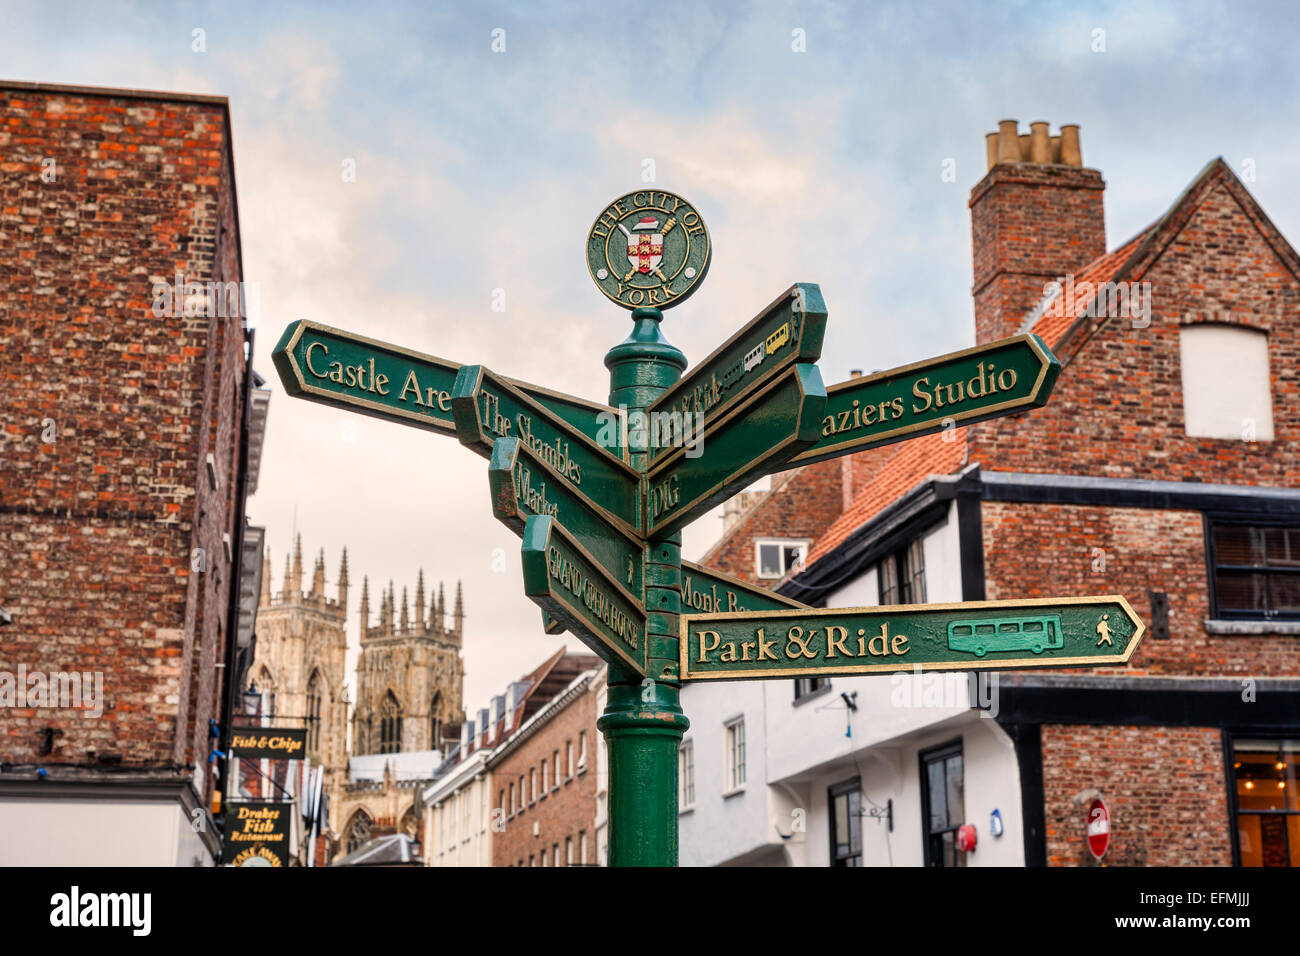 Signpost showing places of interest in Kings Square, York. Focus on sign. Stock Photo